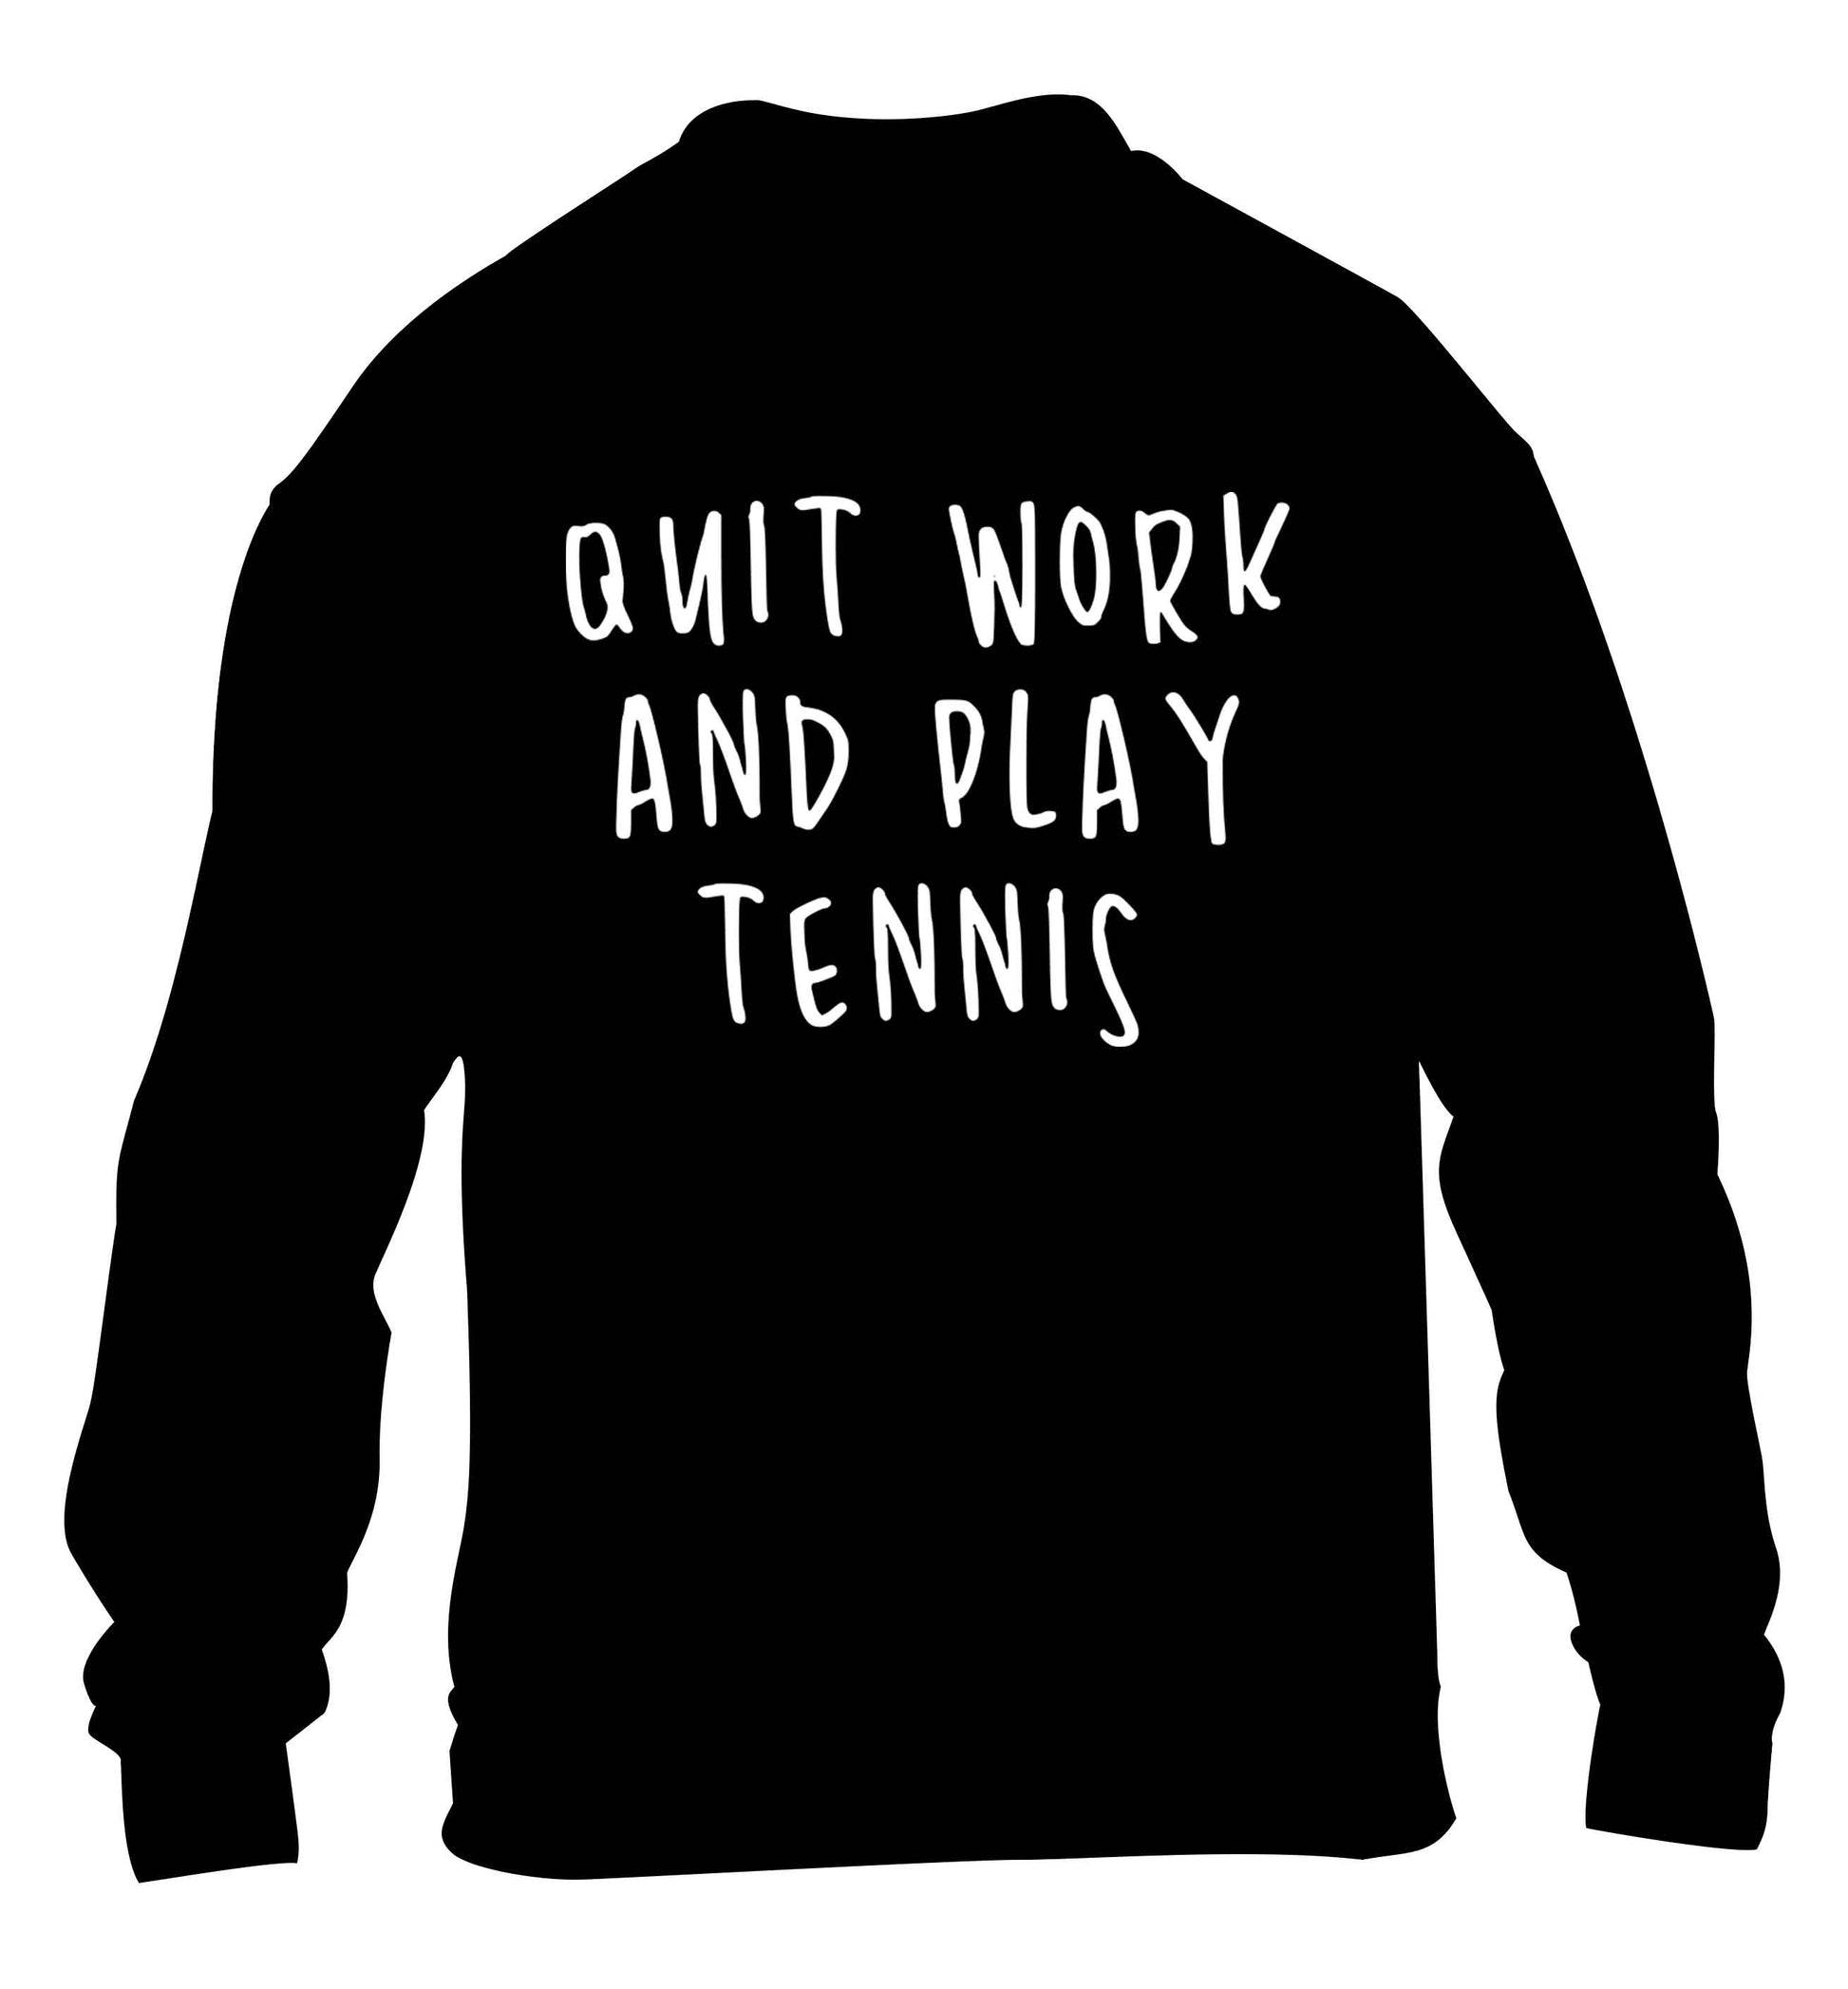 Quit work and play tennis children's black sweater 12-13 Years